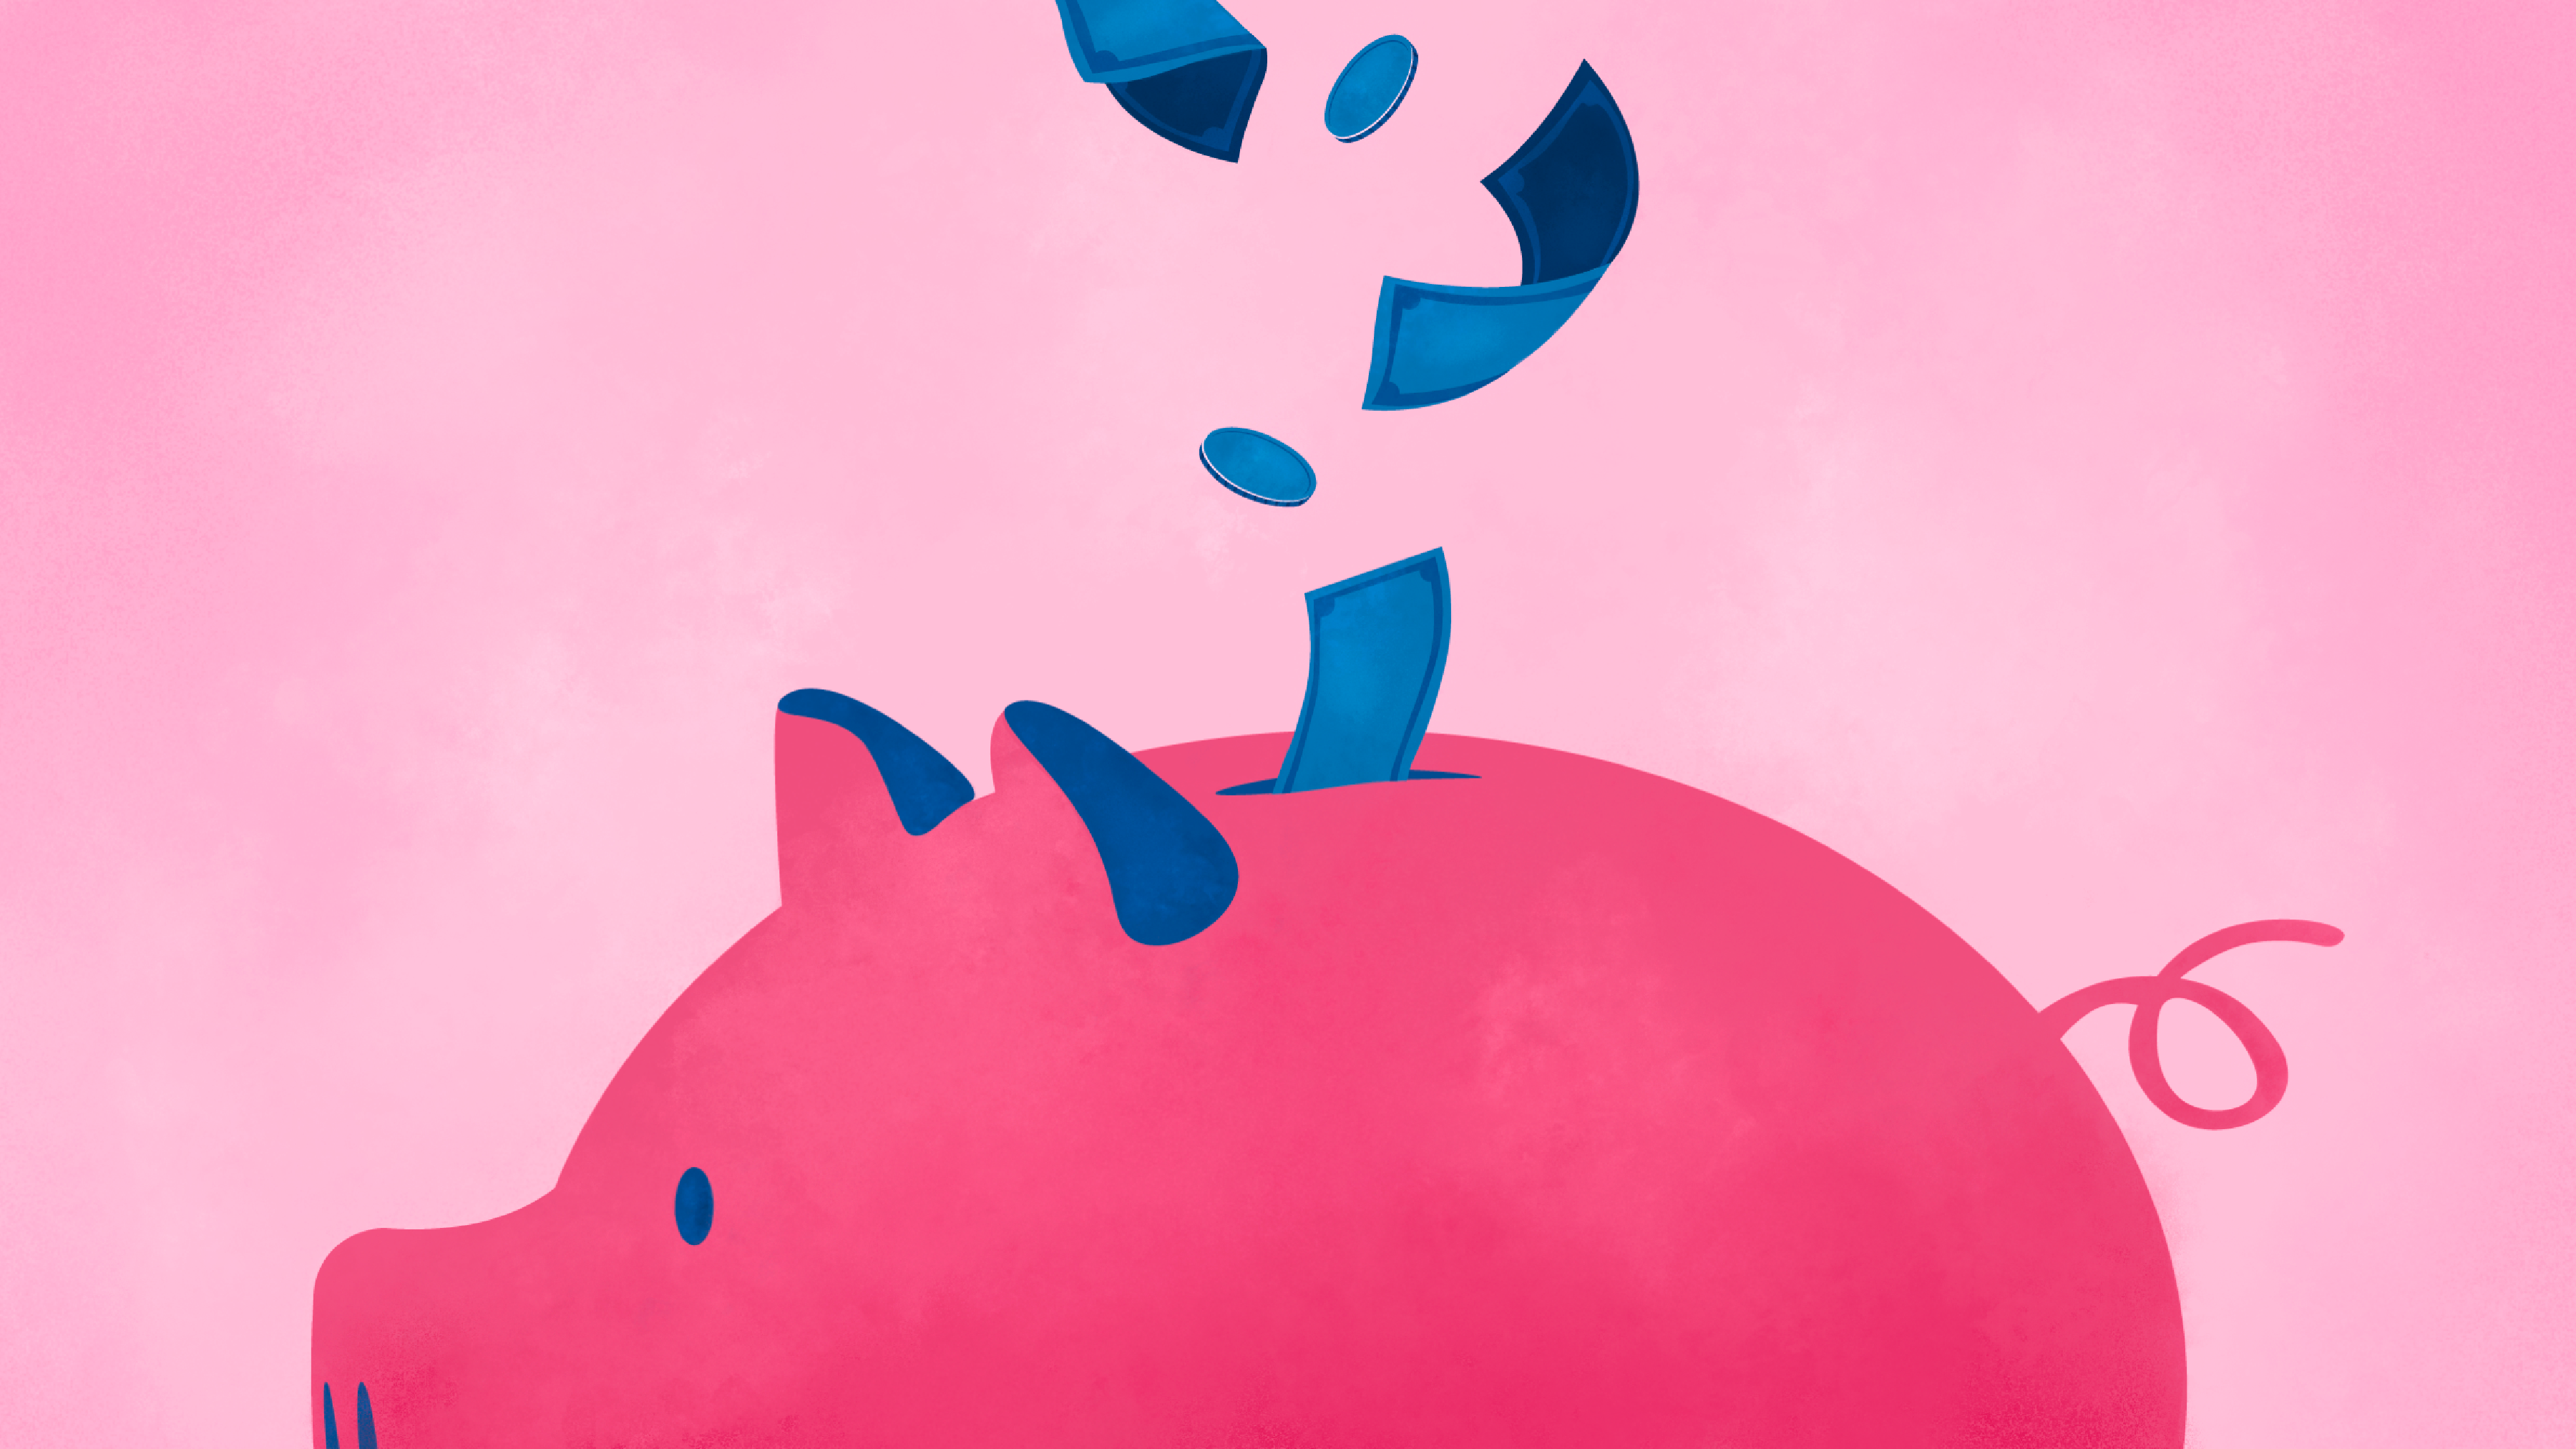 Illustration of piggy bank with bills and coins floating into the slot